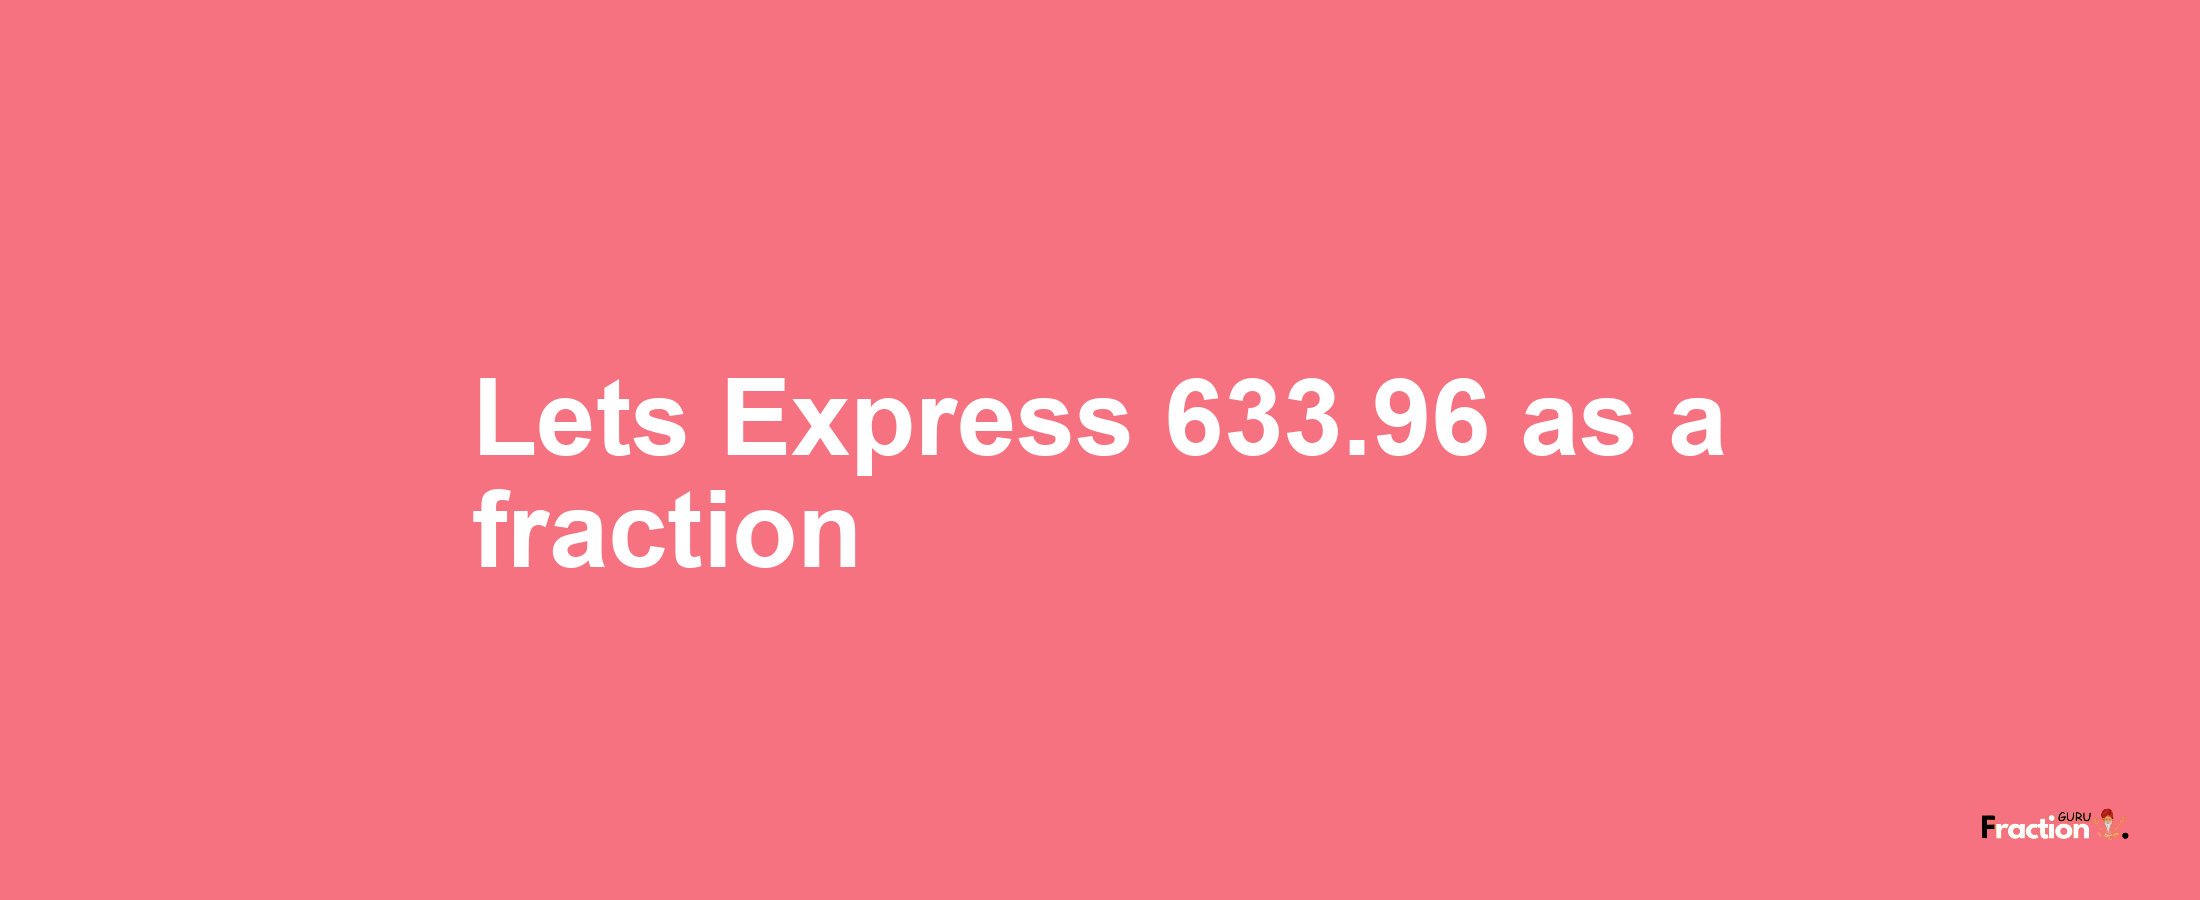 Lets Express 633.96 as afraction